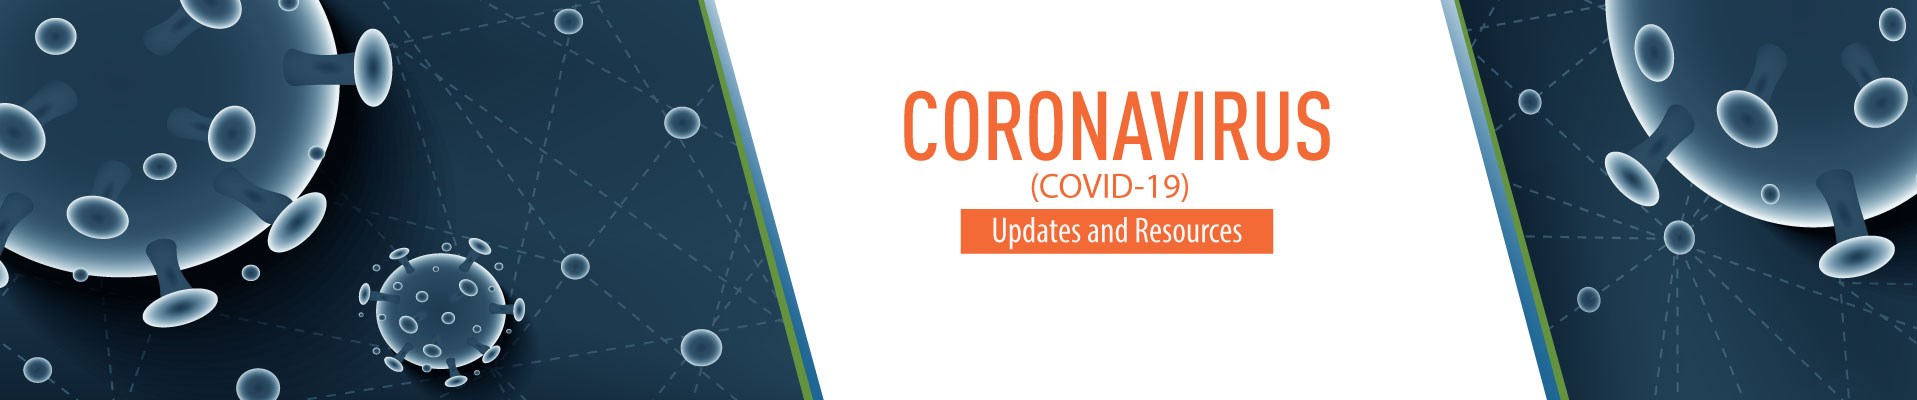 Access updates on COVID-19